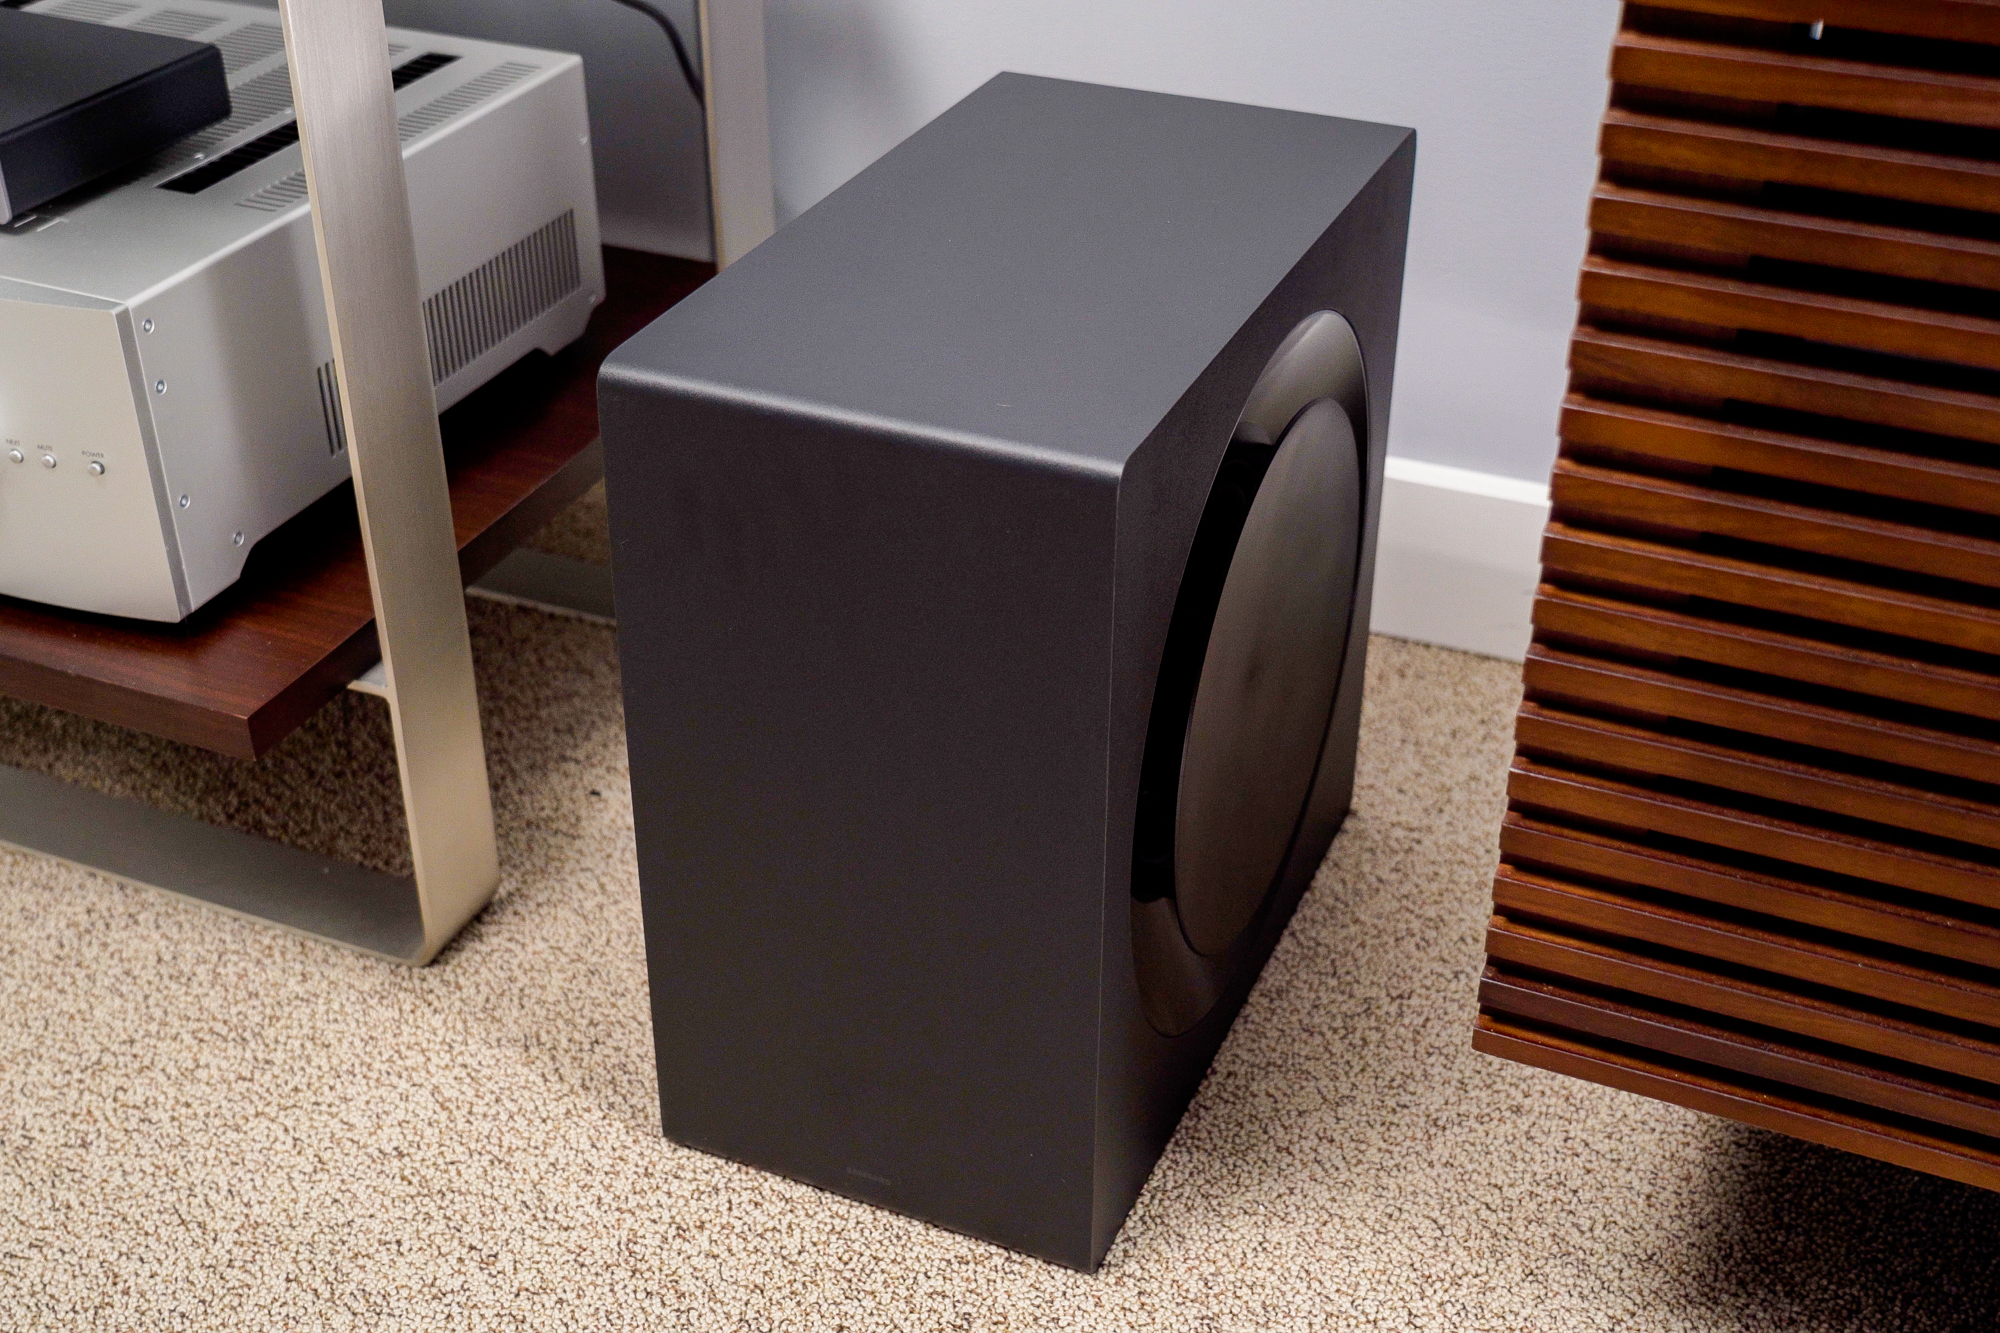 The Samsung Q990B's included subwoofer sitting next to a large media stand